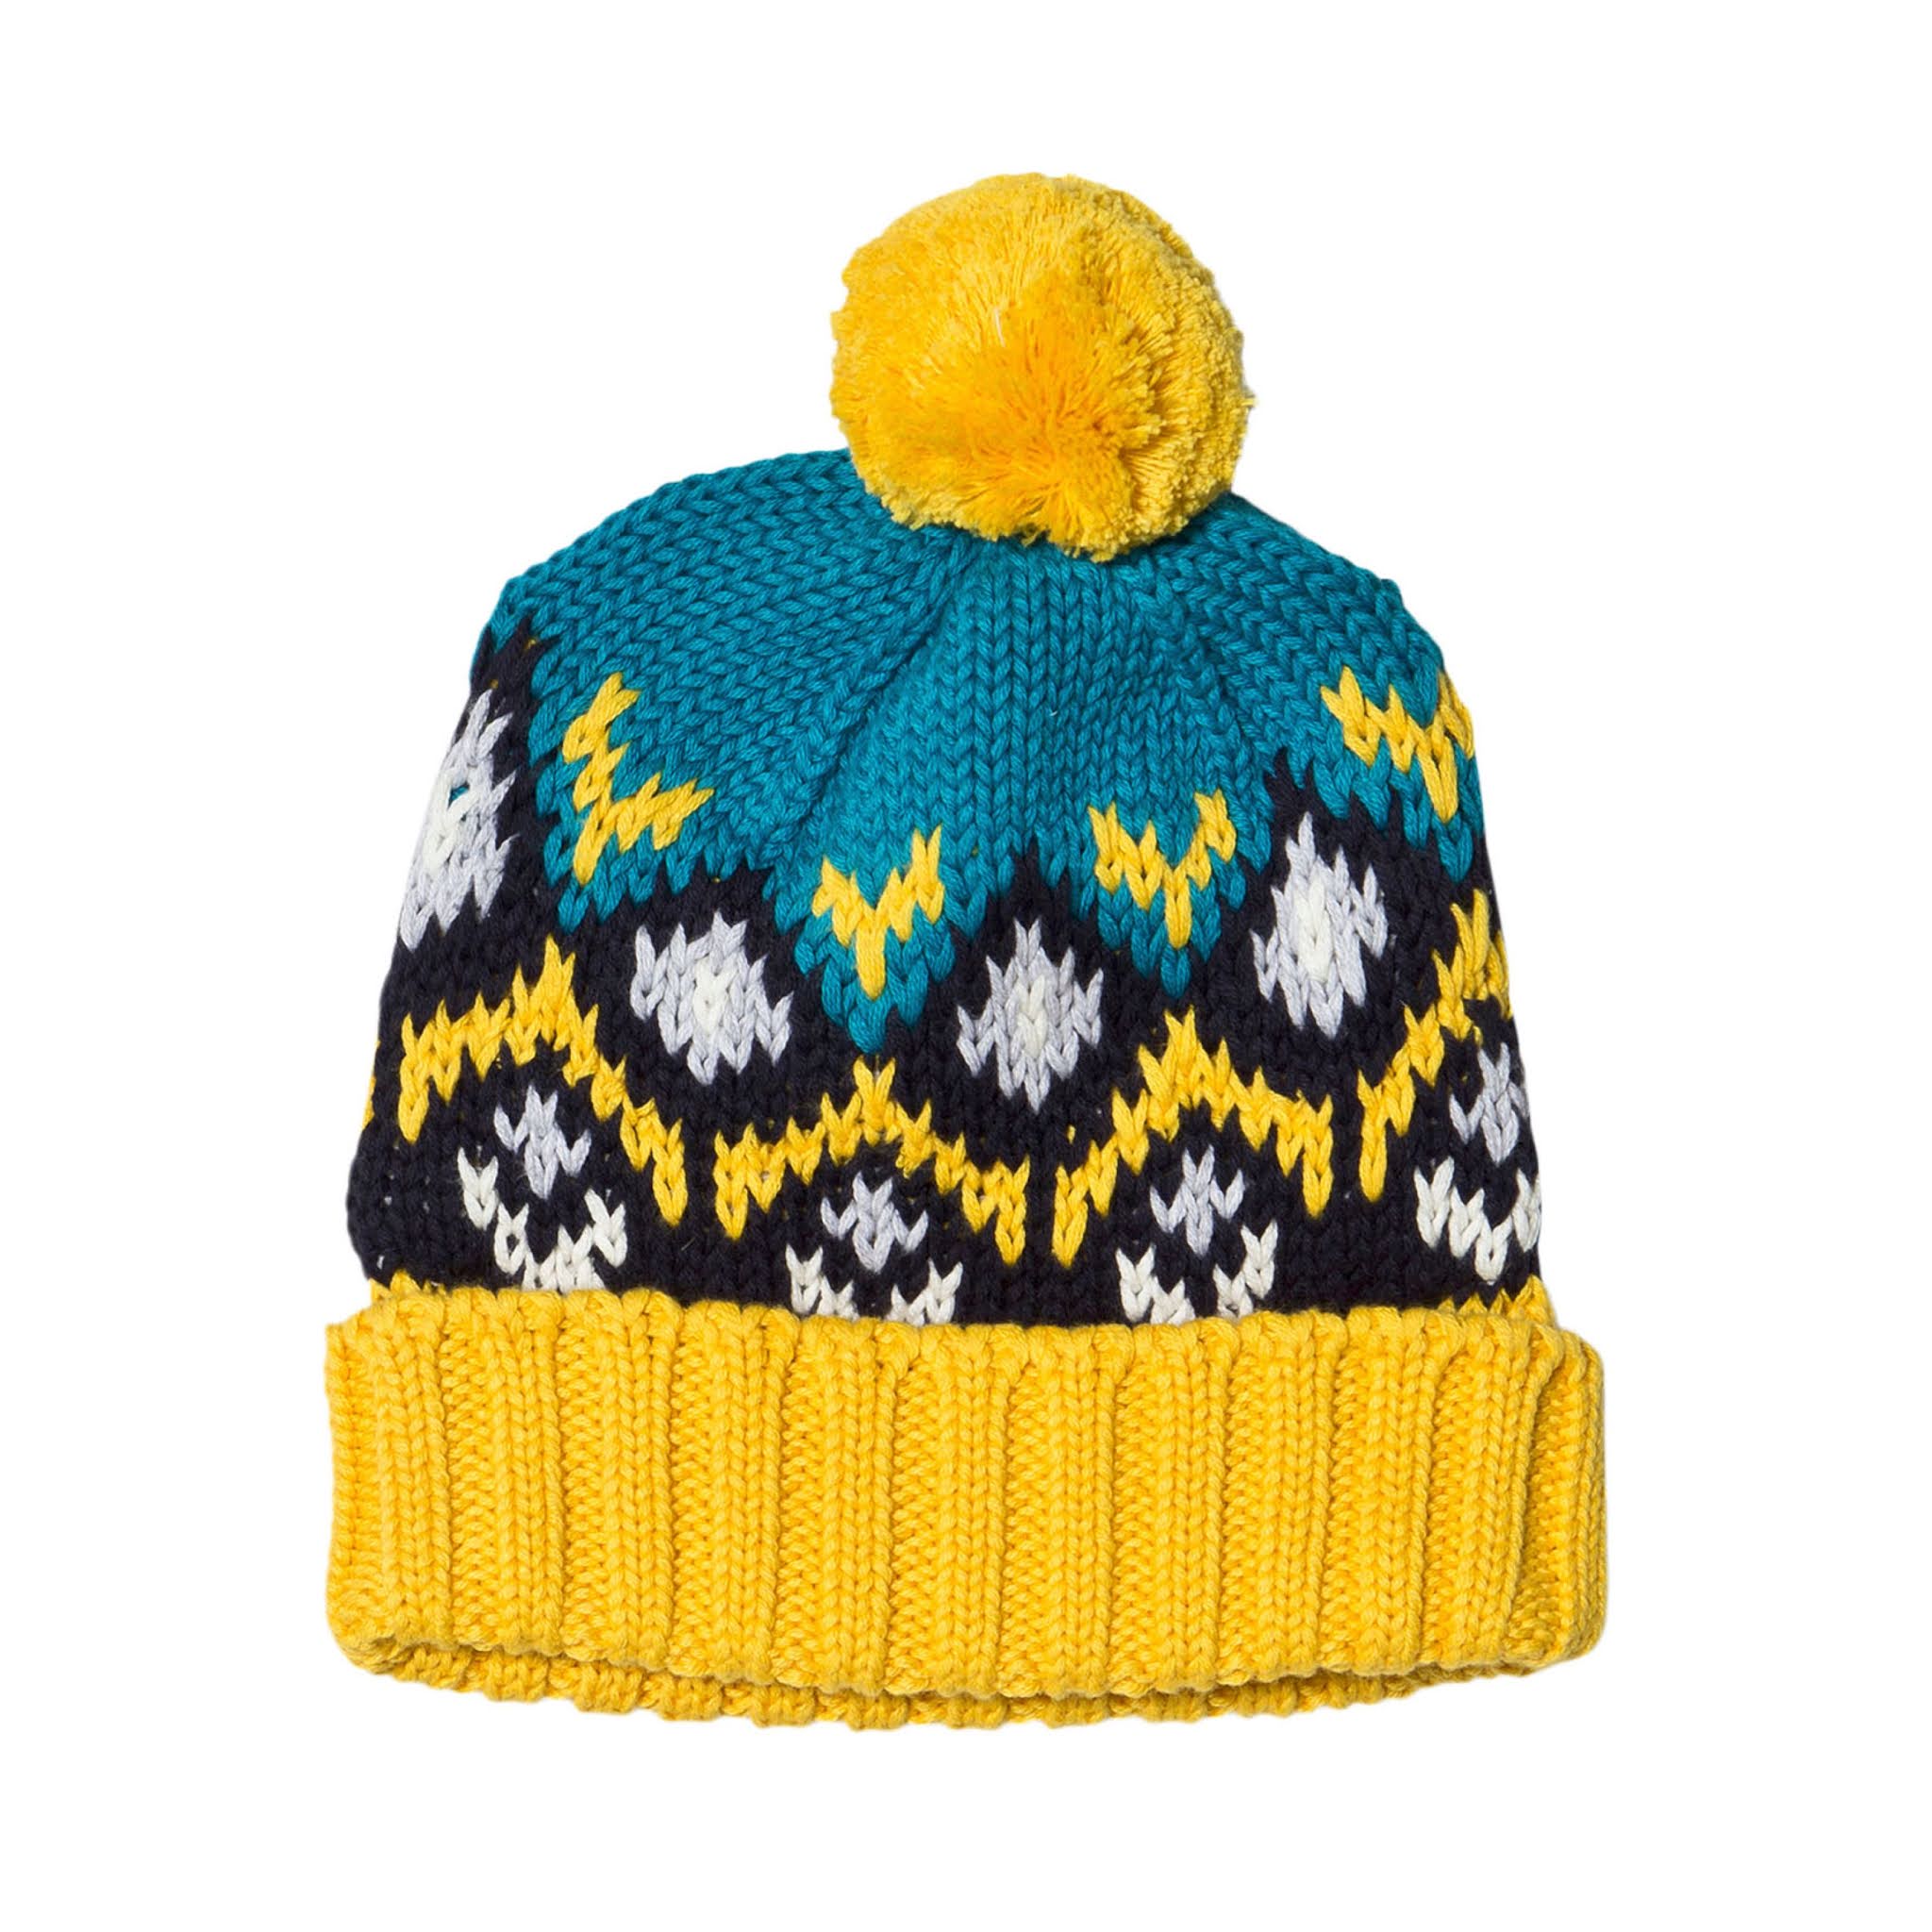 Kids Yellow Knitted Hat from Frugi